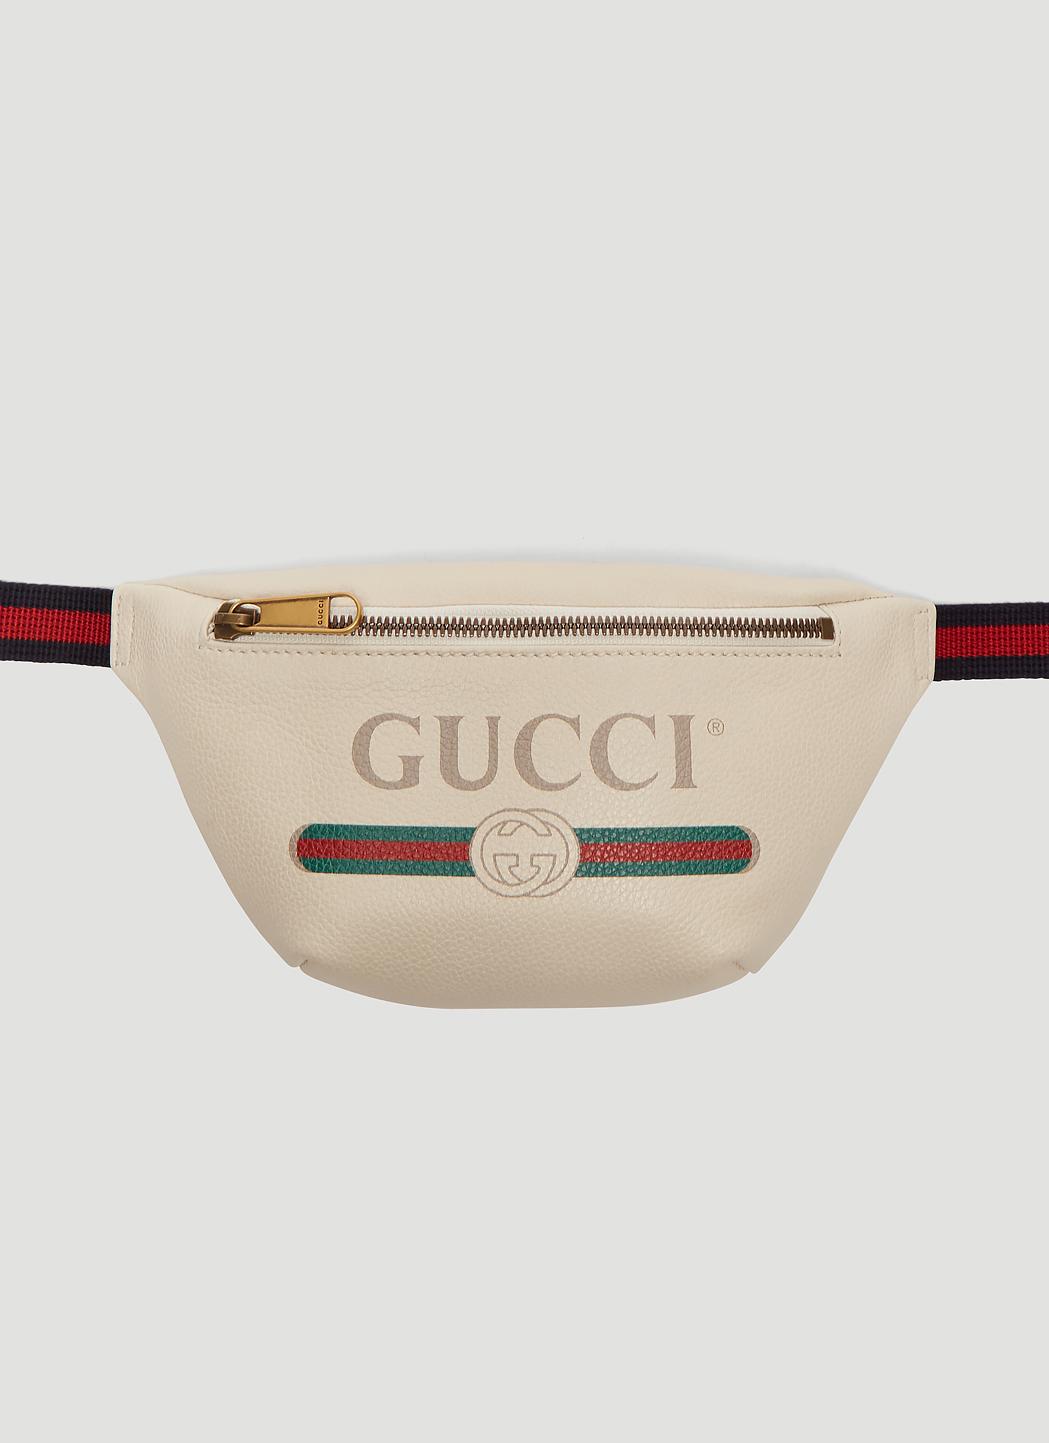 Gucci Leather Logo Belt Bag In White in White for Men - Lyst